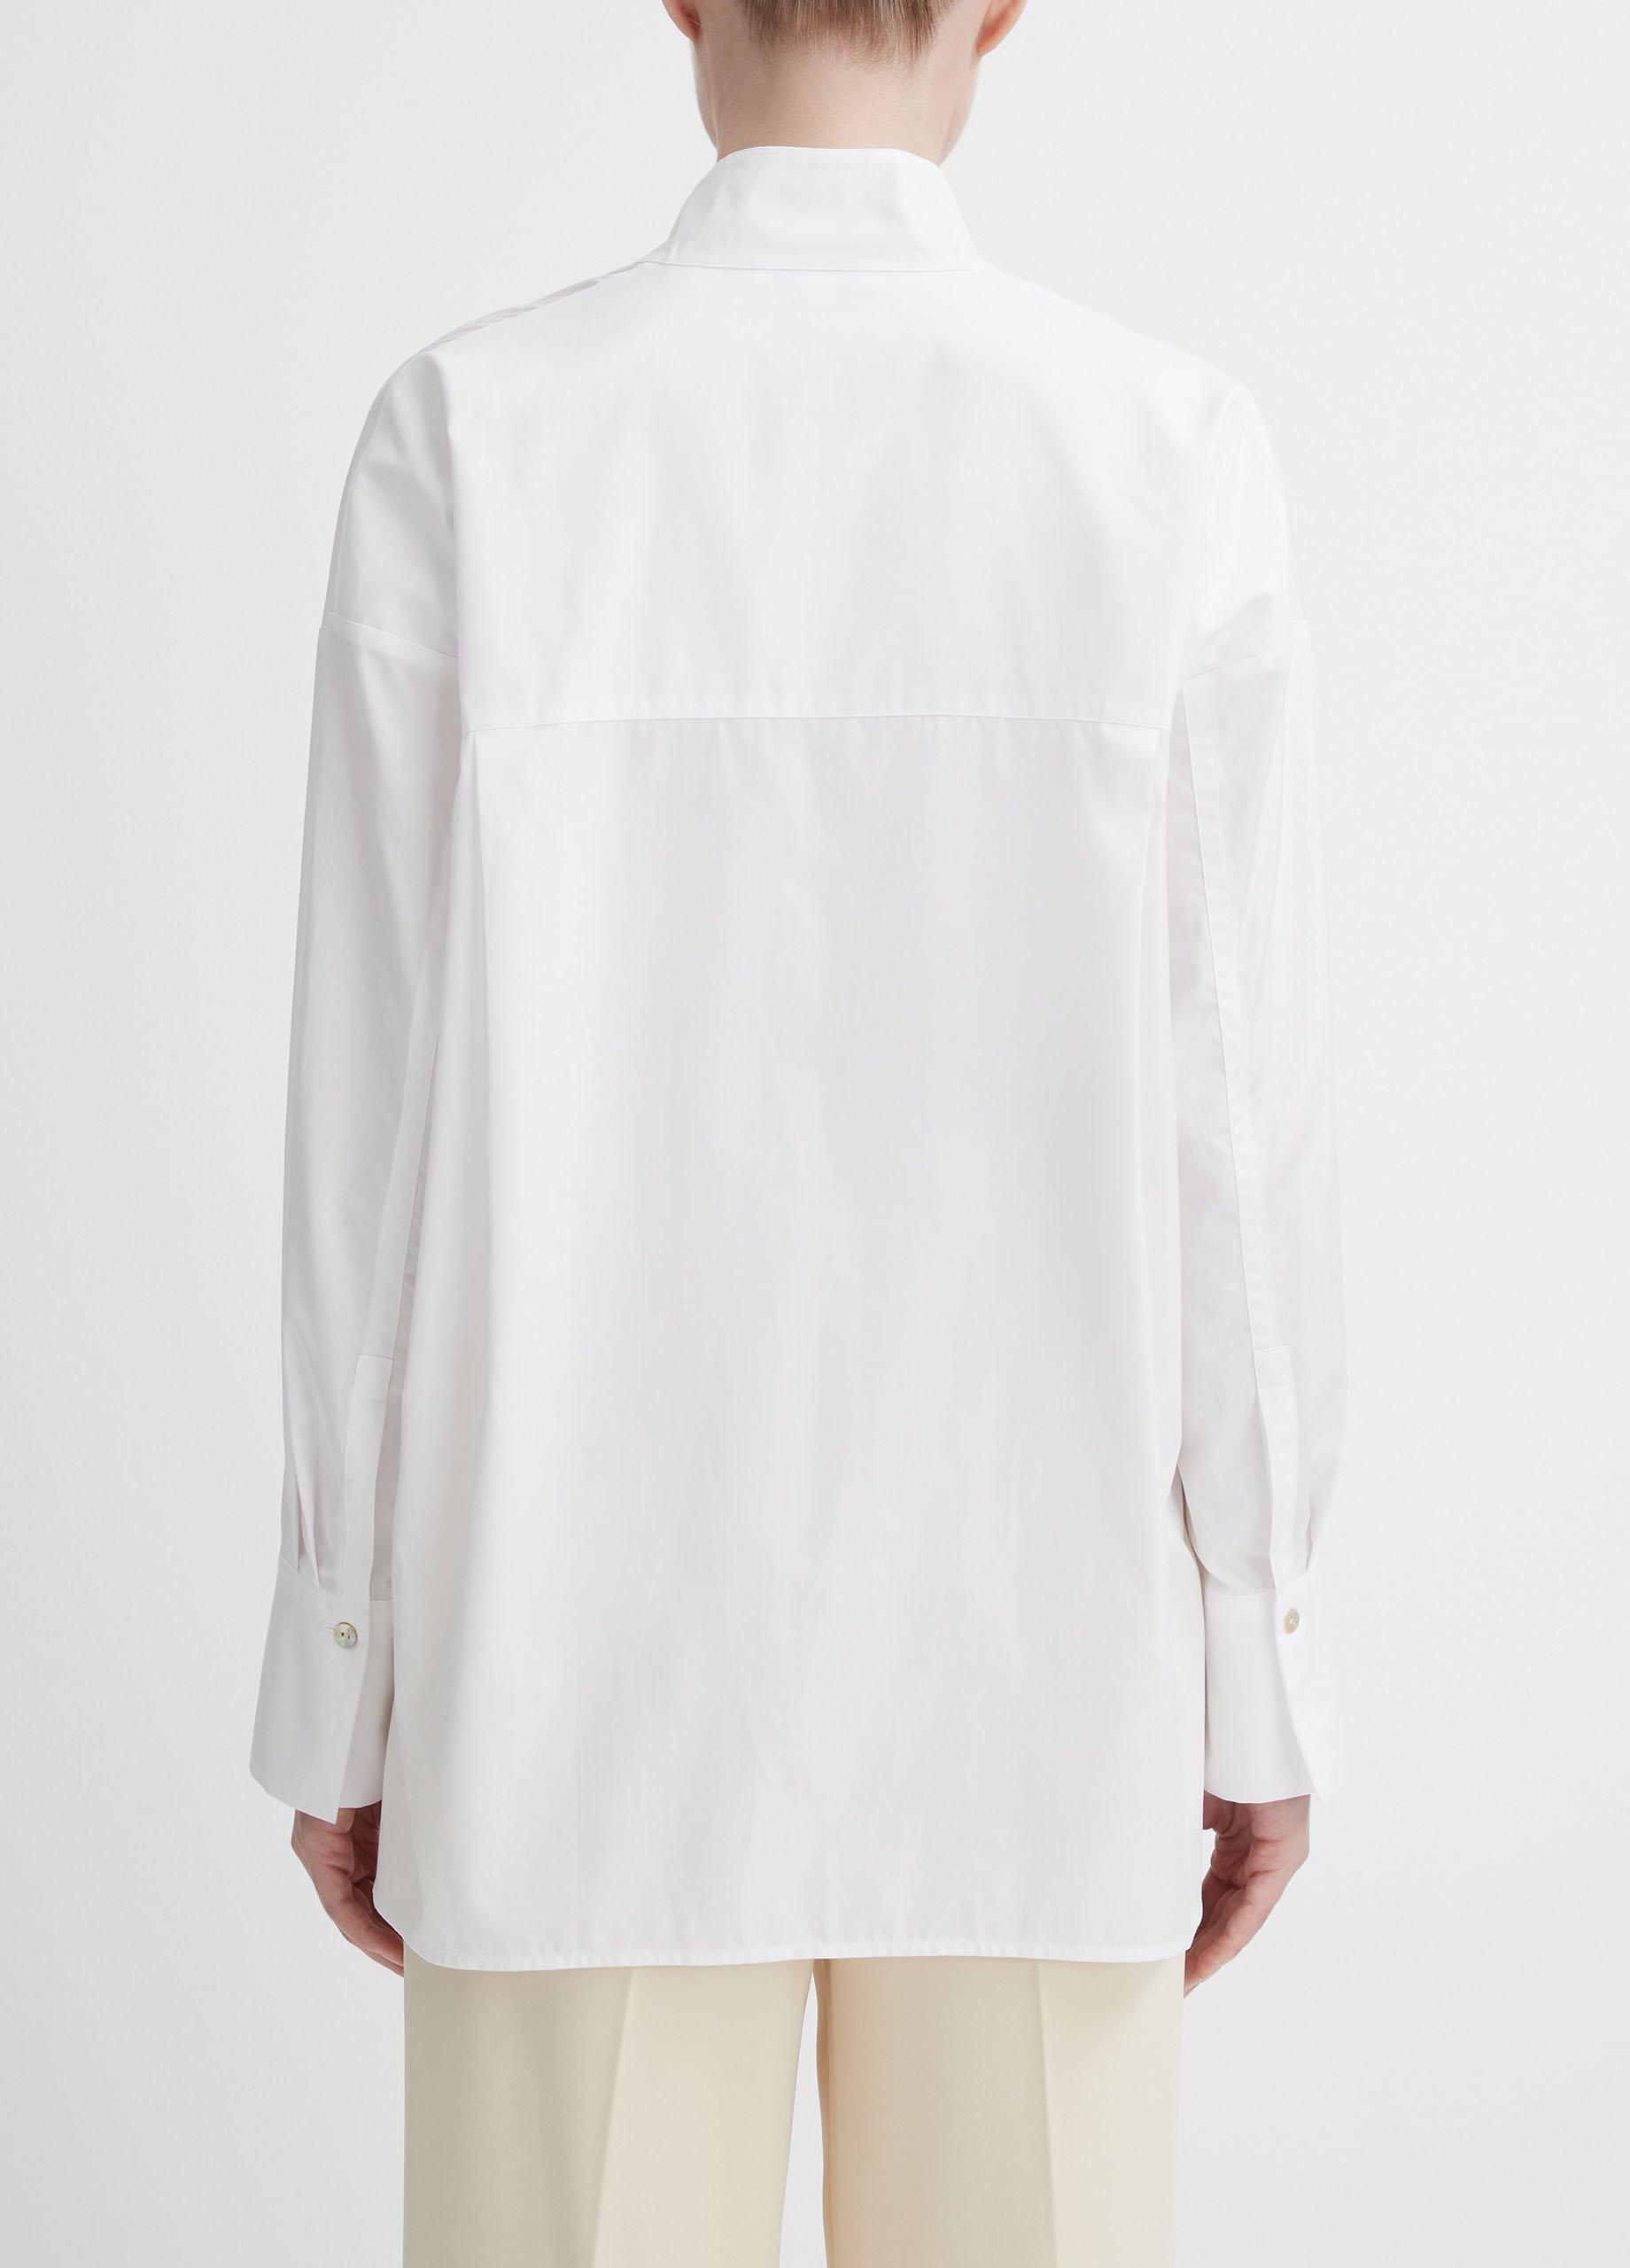 Half-Placket Stand-Collar Shirt in Shirts & Tees | Vince